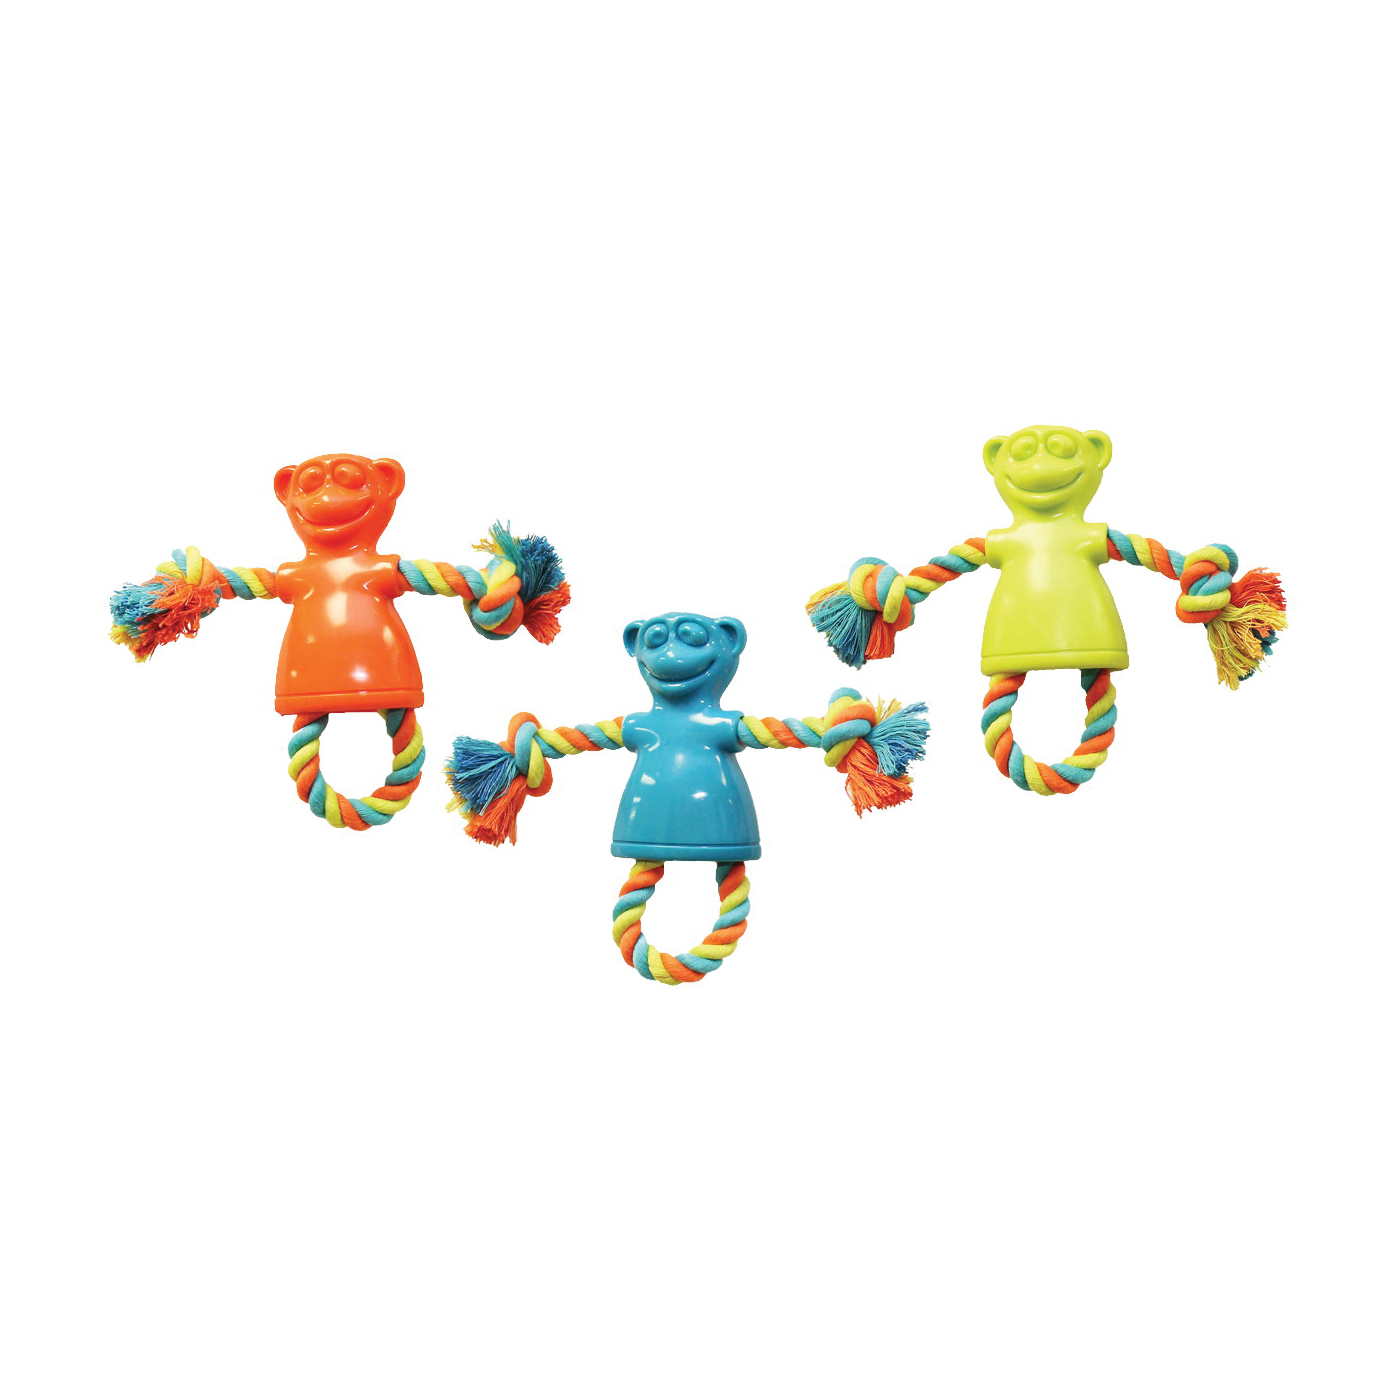 WB15501 Dog Toy, S, Monkey, Thermoplastic Rubber